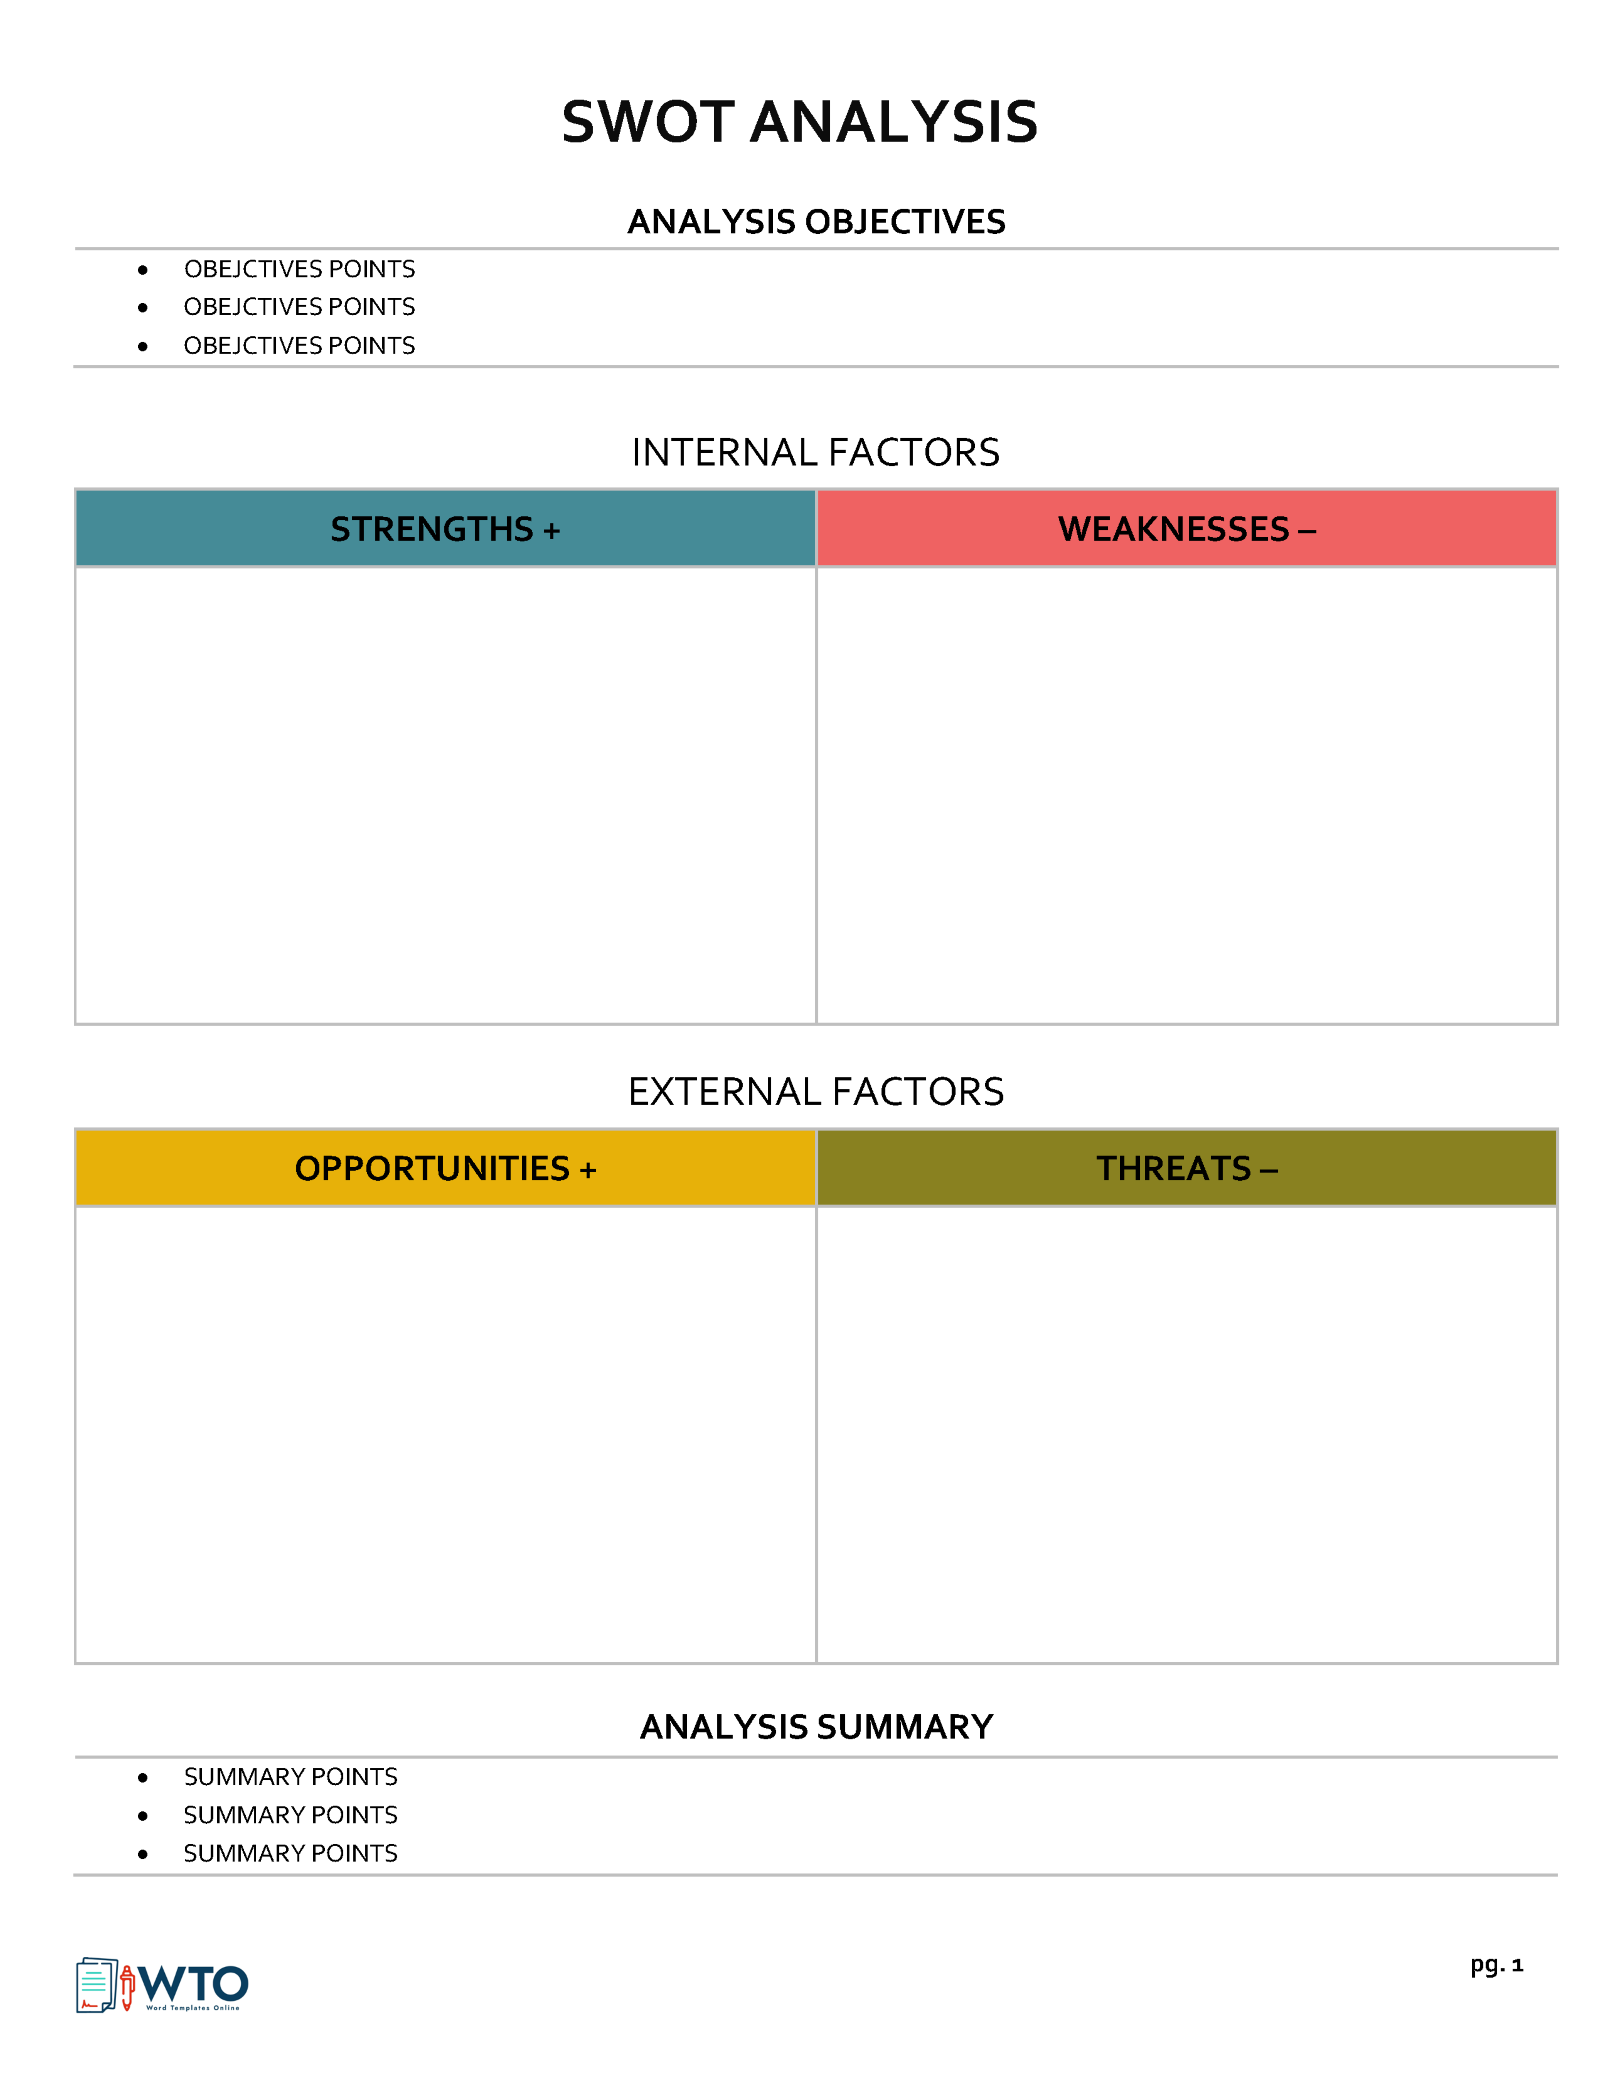 SWOT Analysis Sample for Business